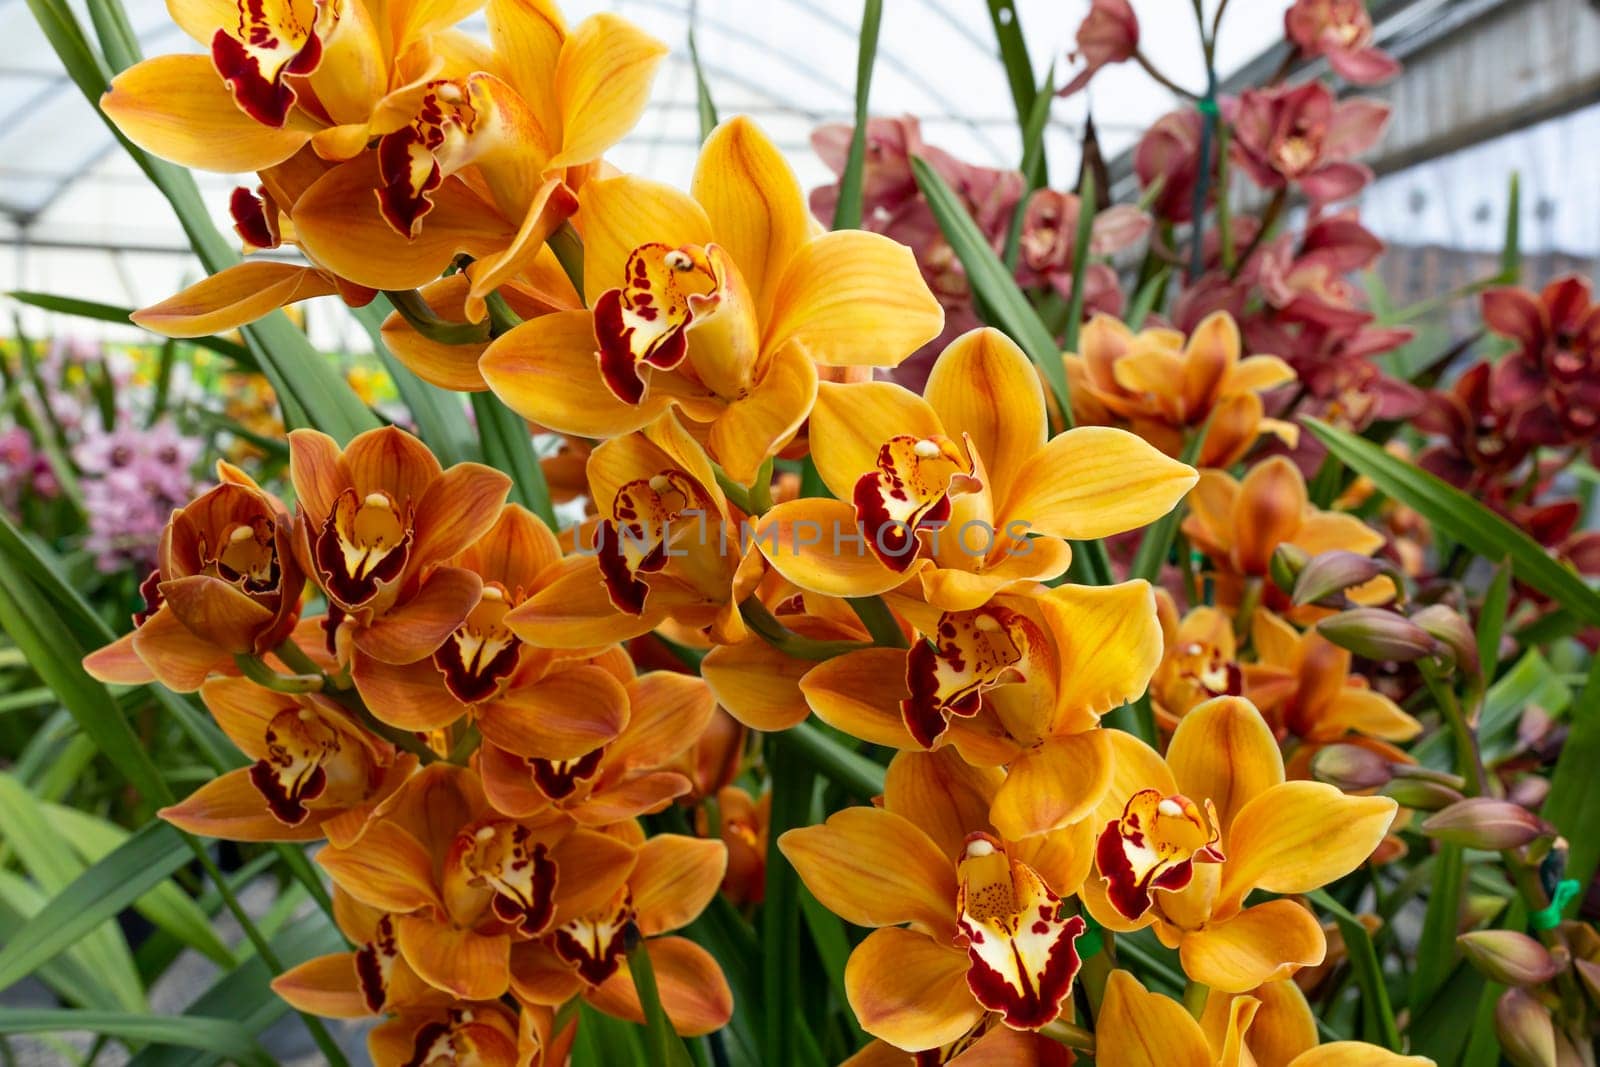 Yellow Red Cymbidiums Orchid Plant Flower in Greenhouse, family Orchidaceae. Blooming Cosmopolitan Flower with Green Leaves. Flora, Floriculture. Horizontal Plane. by netatsi